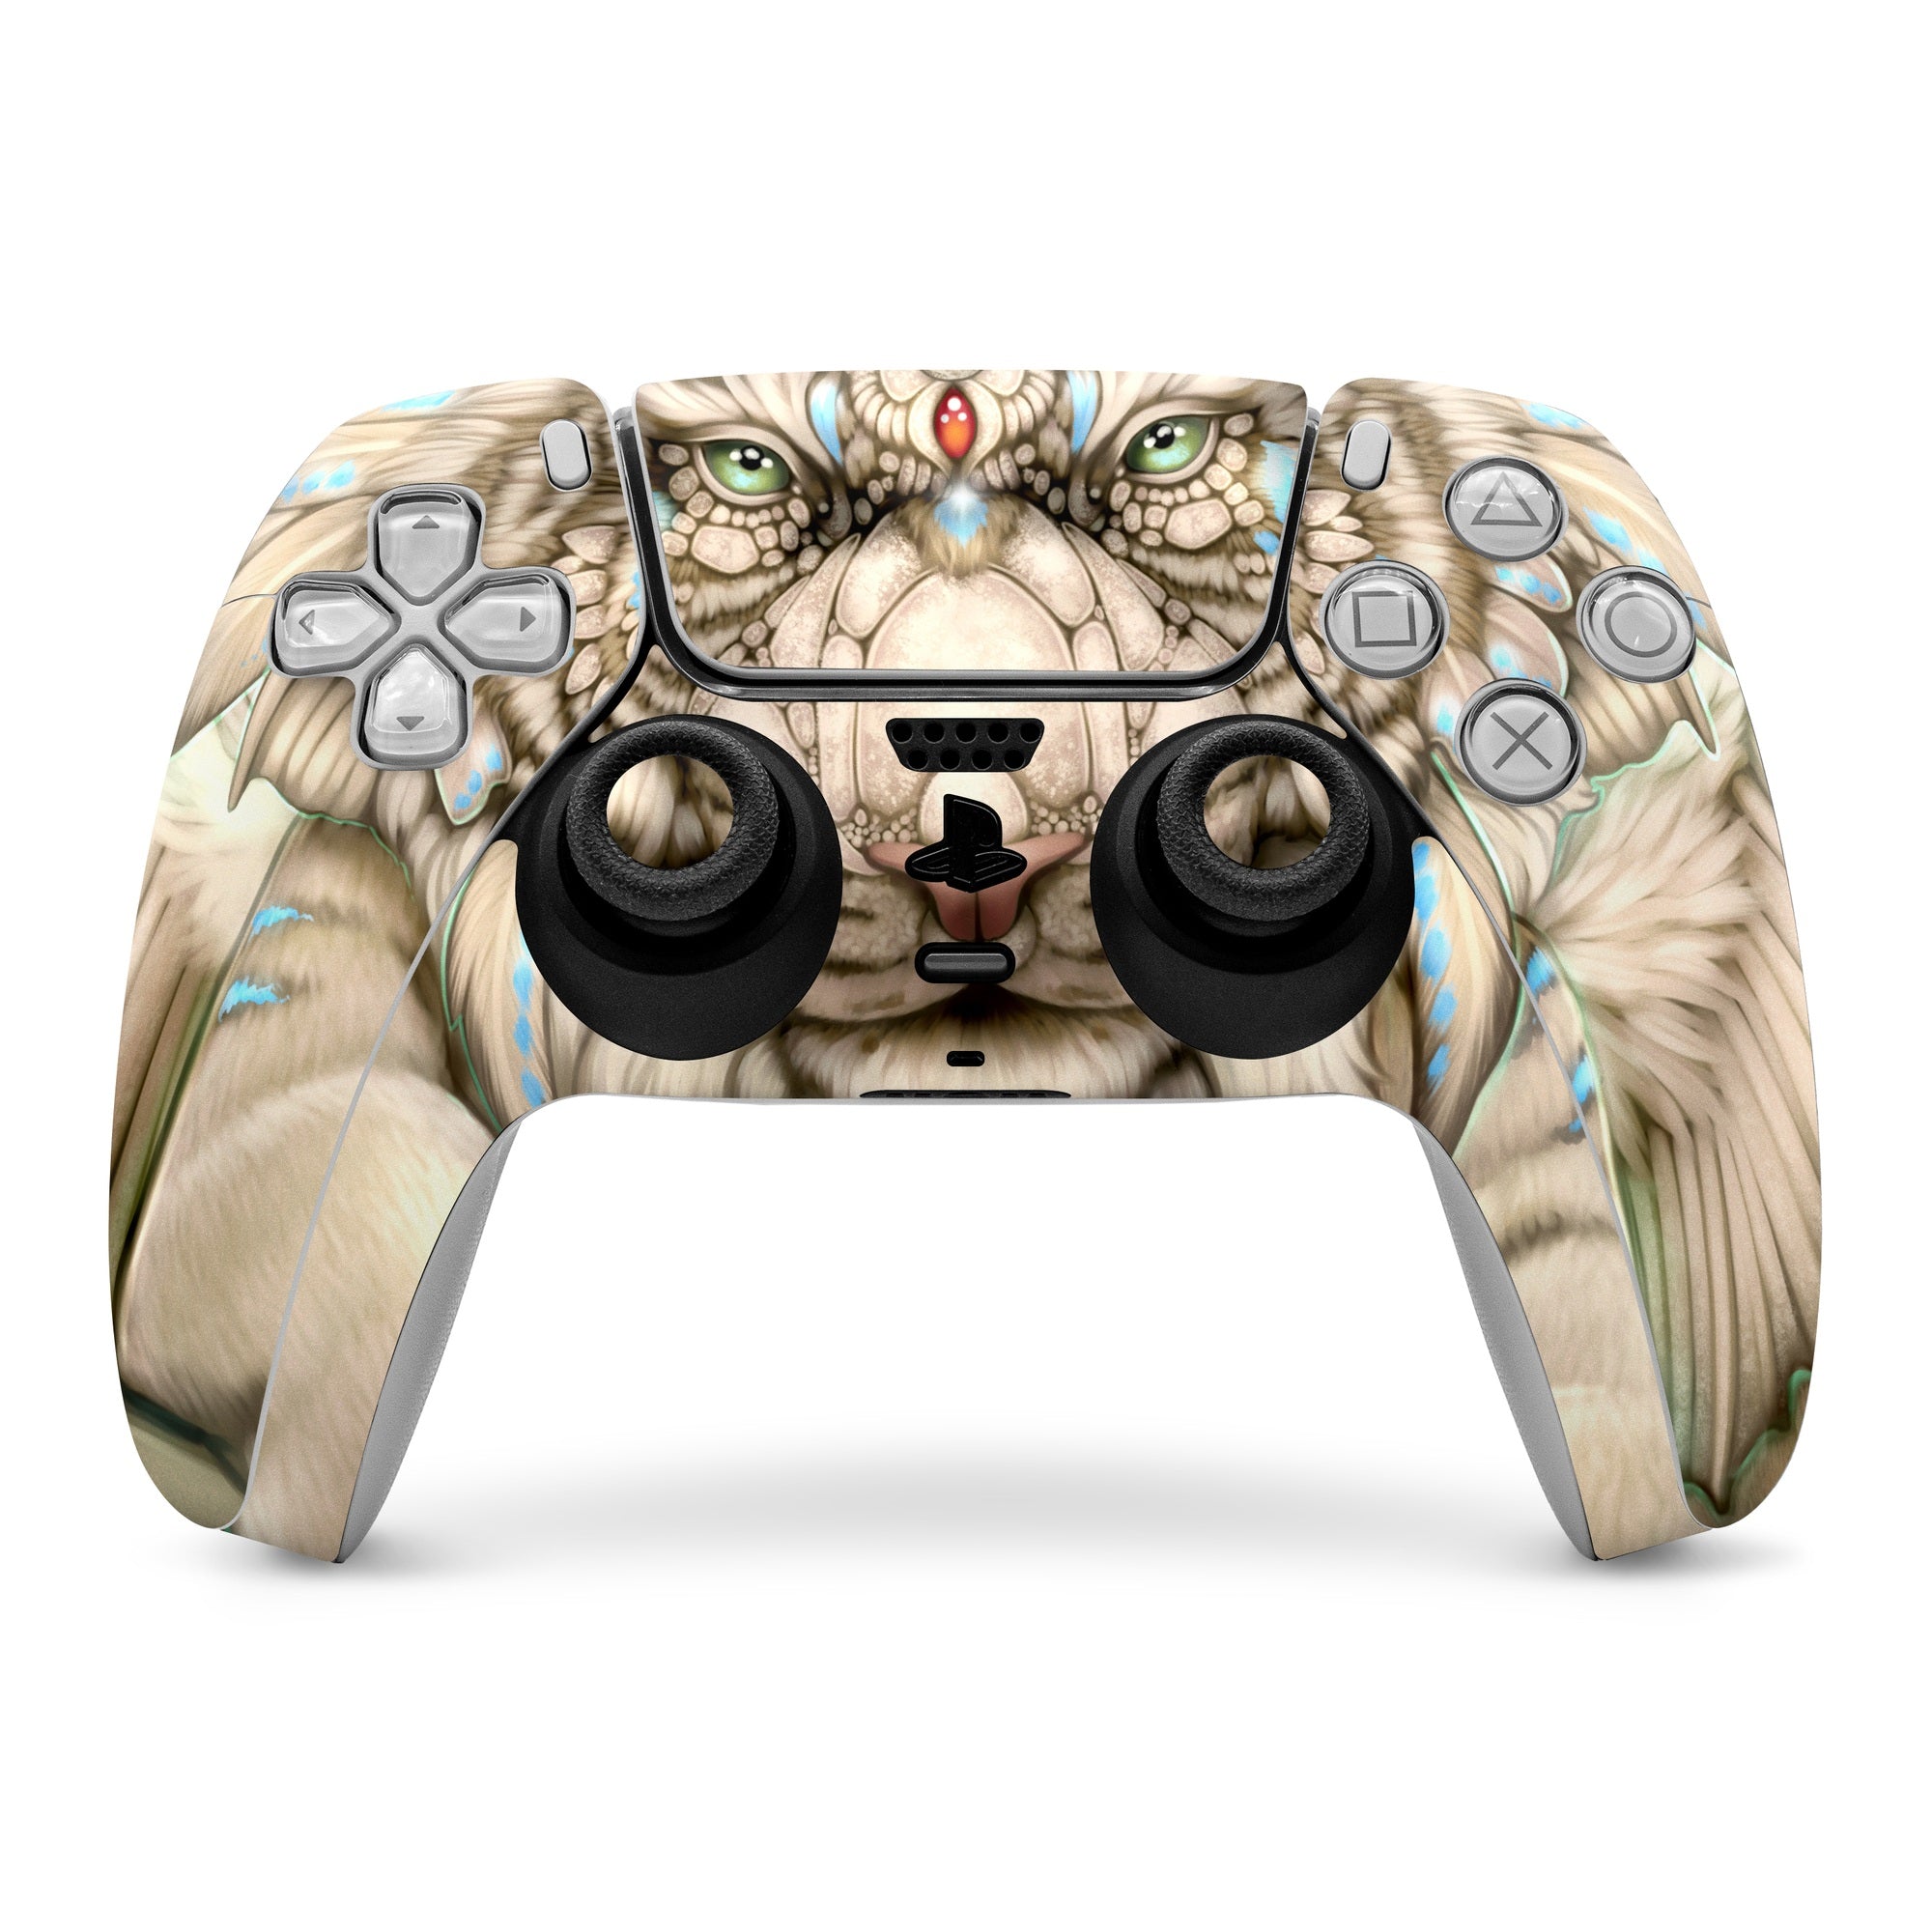 What Do You Seek - Sony PS5 Controller Skin